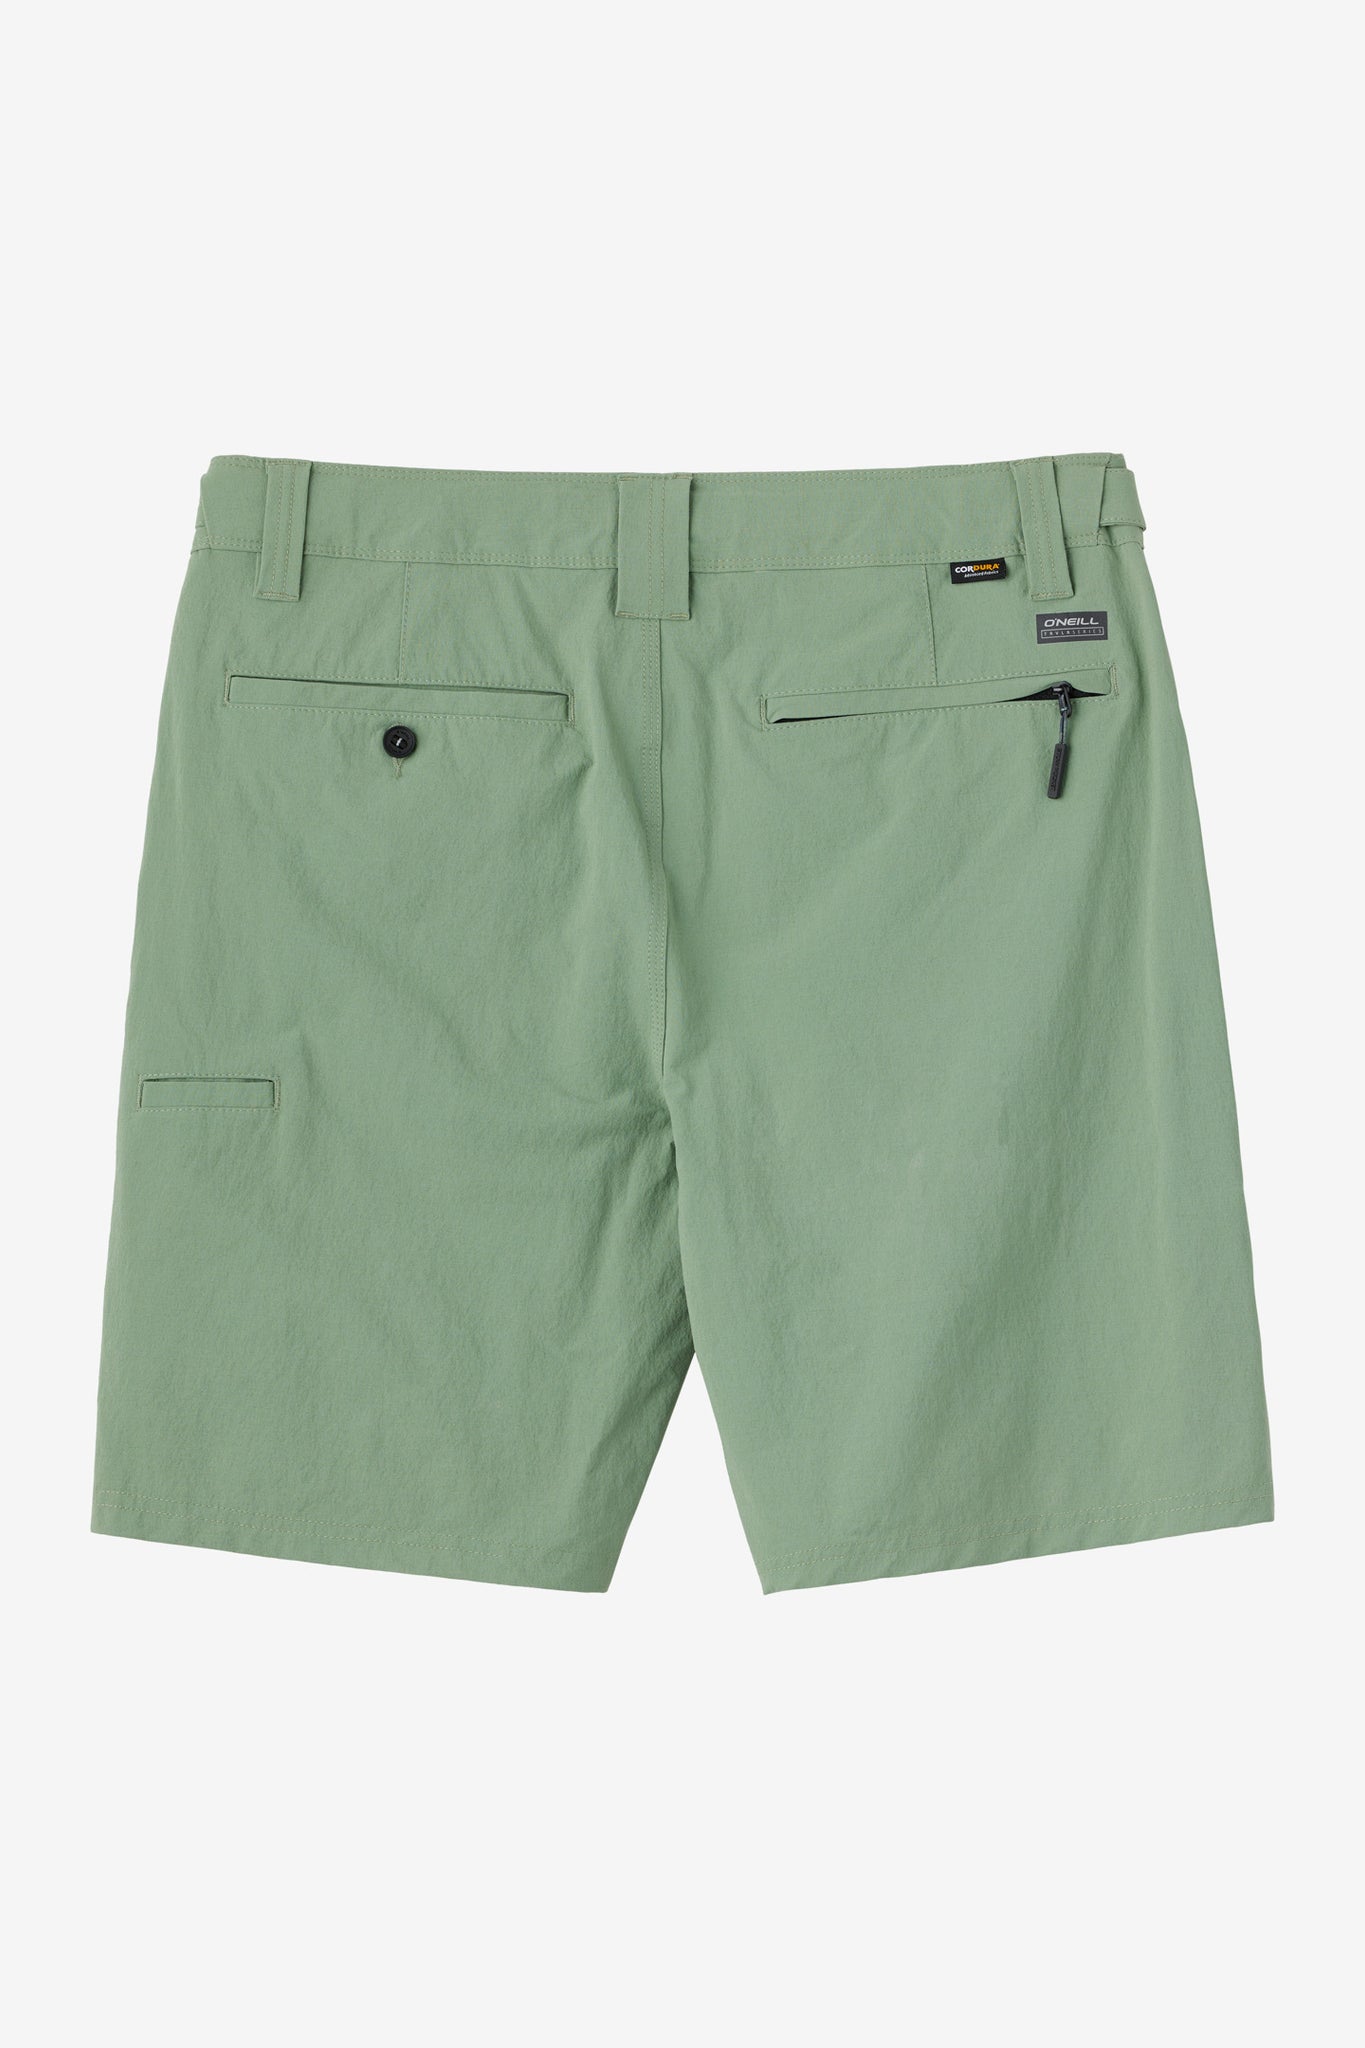 EAST CLIFF EXPEDITION 19" HYBRID SHORTS